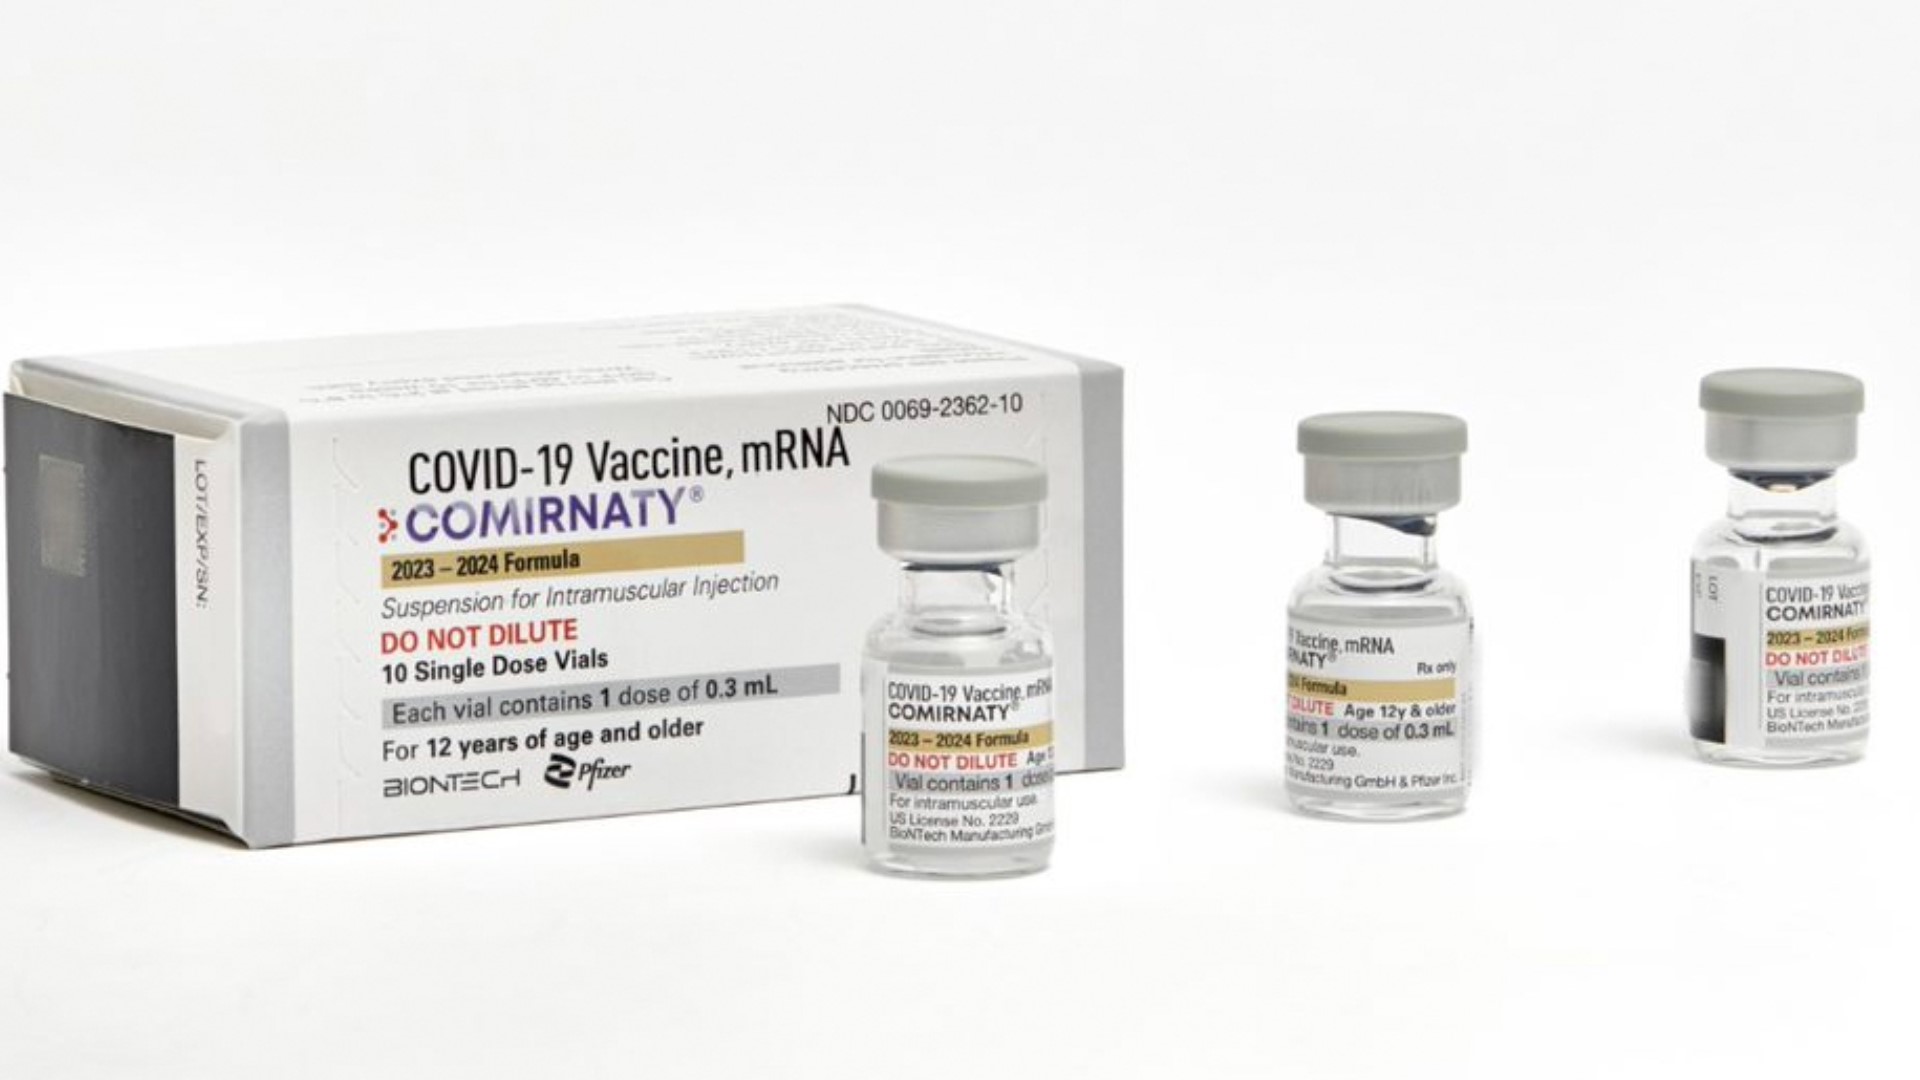 Several new variants are spreading, and the FDA's approval means the shots can now be legally offered.